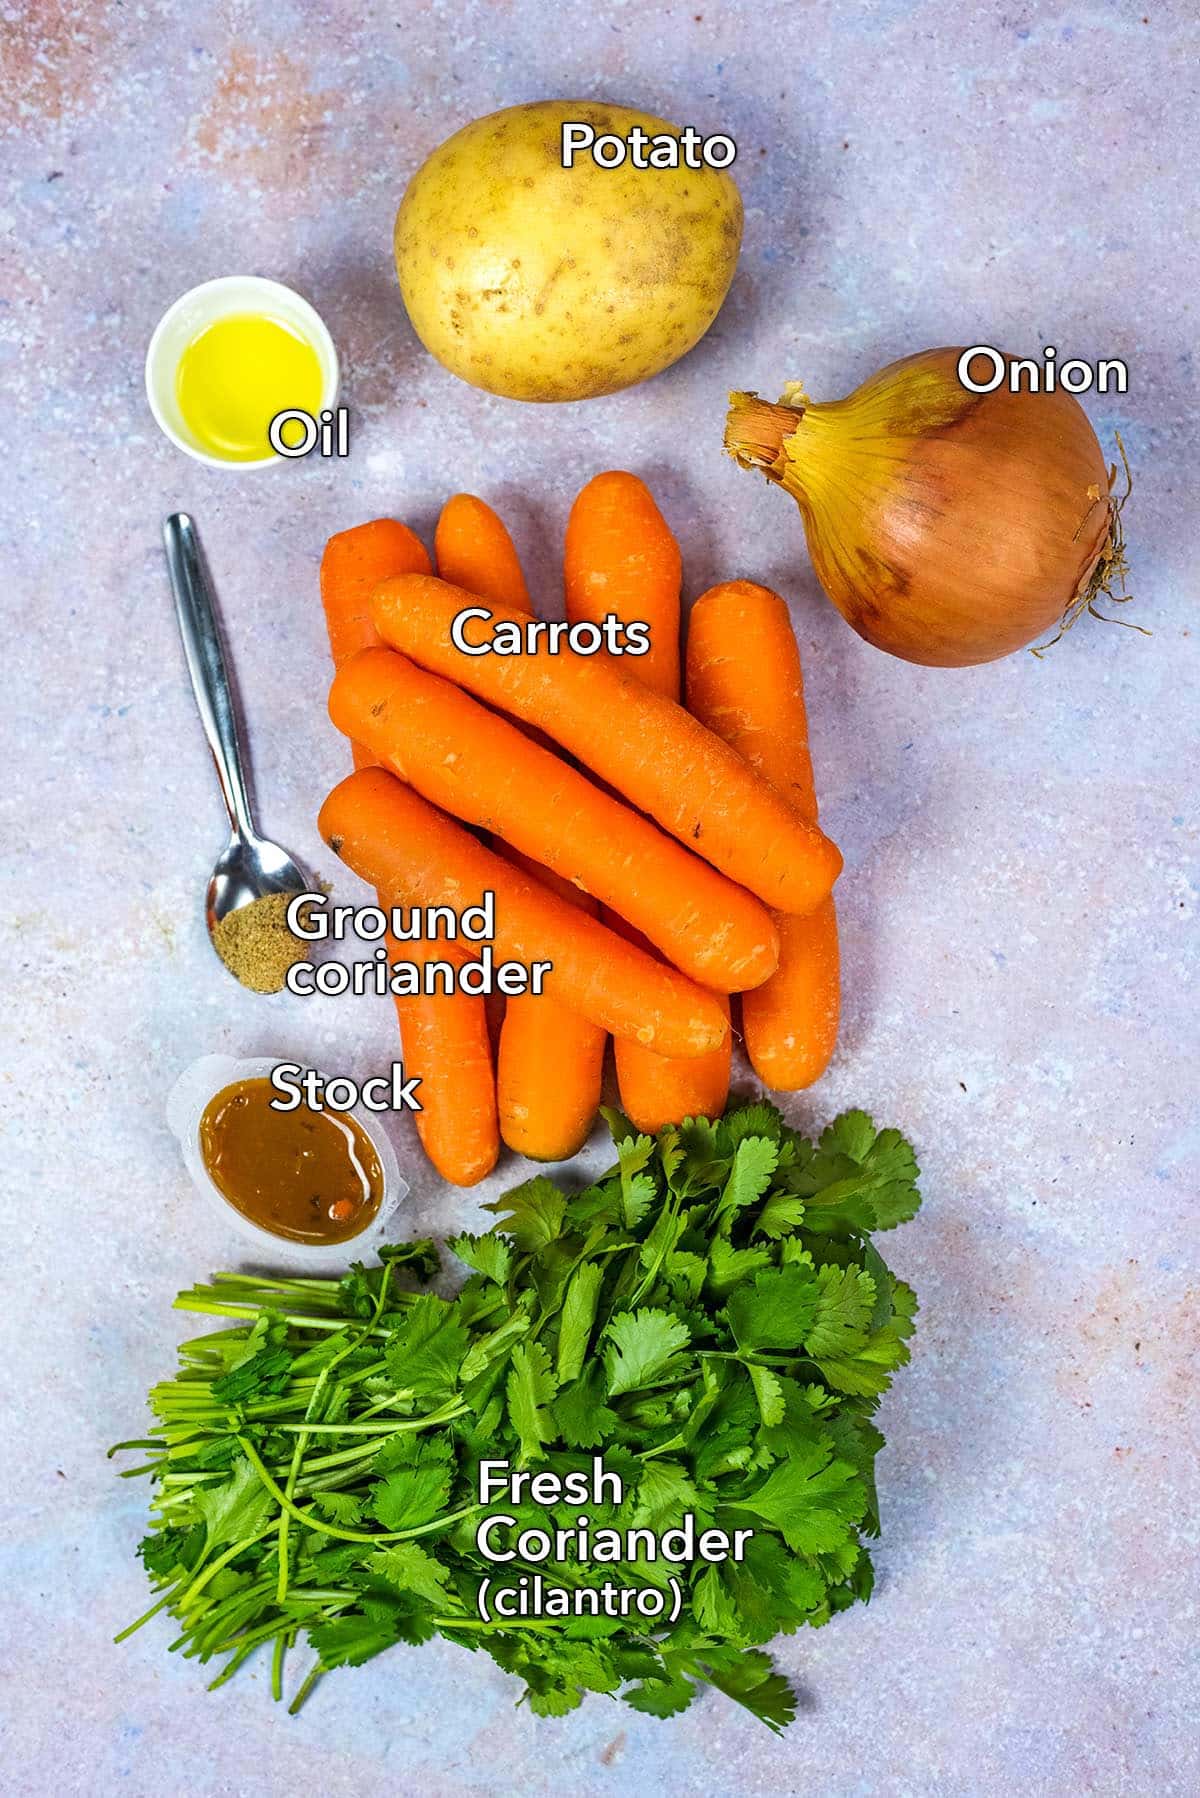 All the ingredients needed to make this recipe with text label overlay.